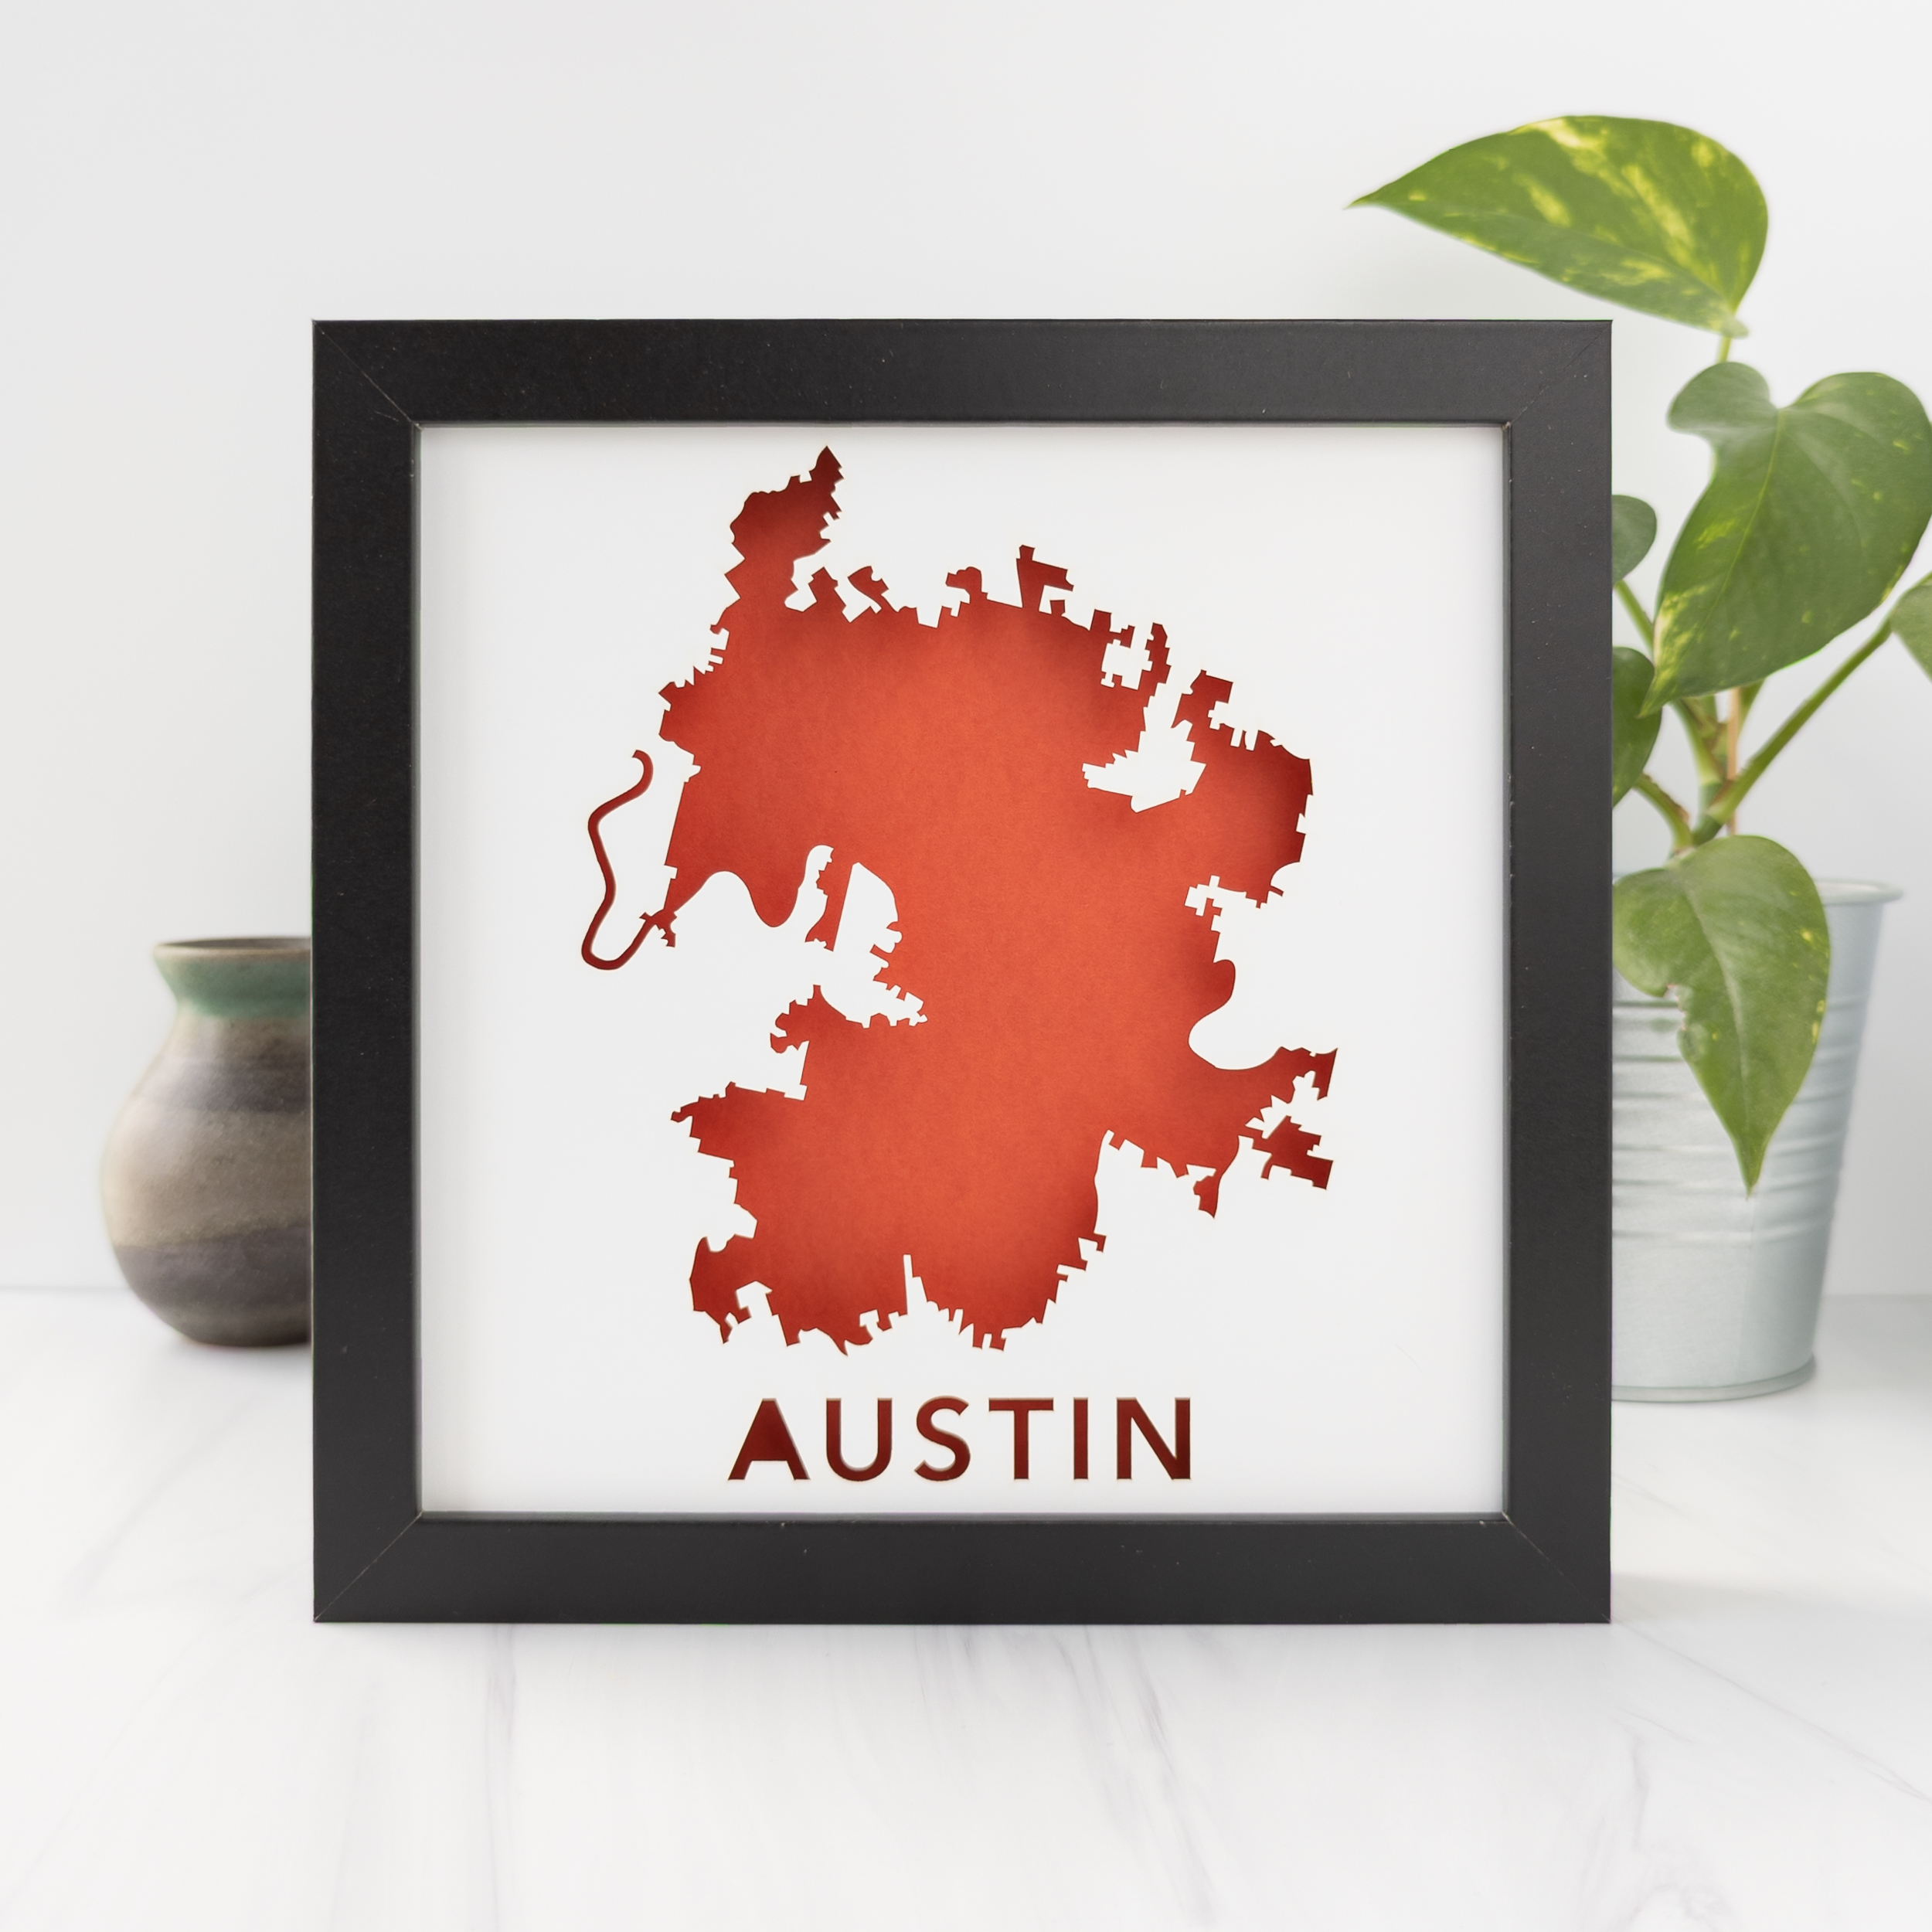 a framed map of the city of Austin, TX in orange